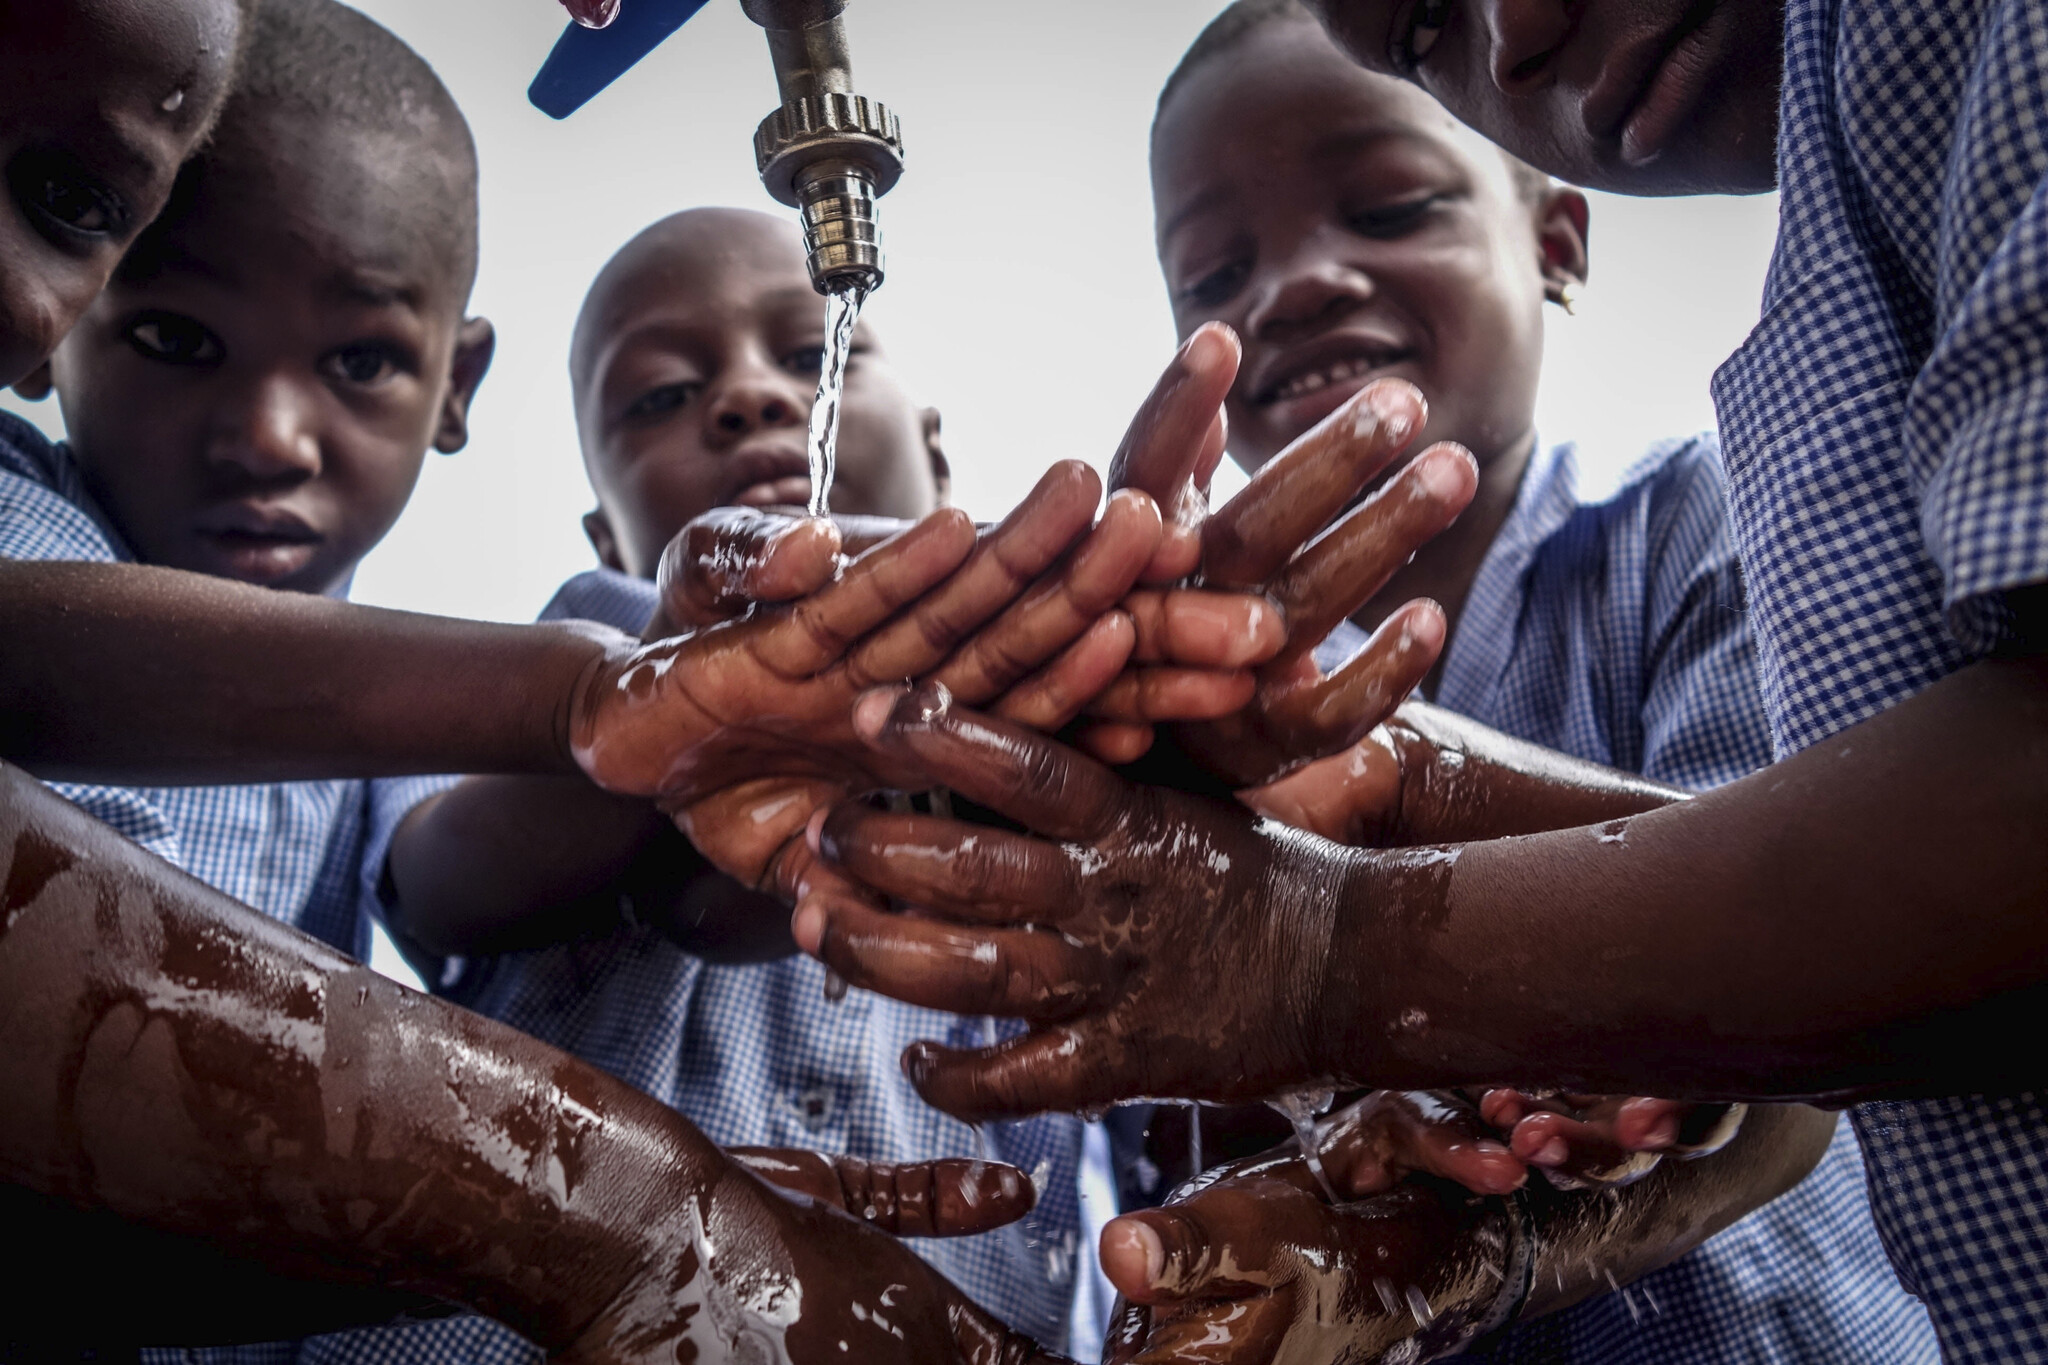 Boys washing hands under outdoor faucet, Jake Meyers, Peace Corps Benin